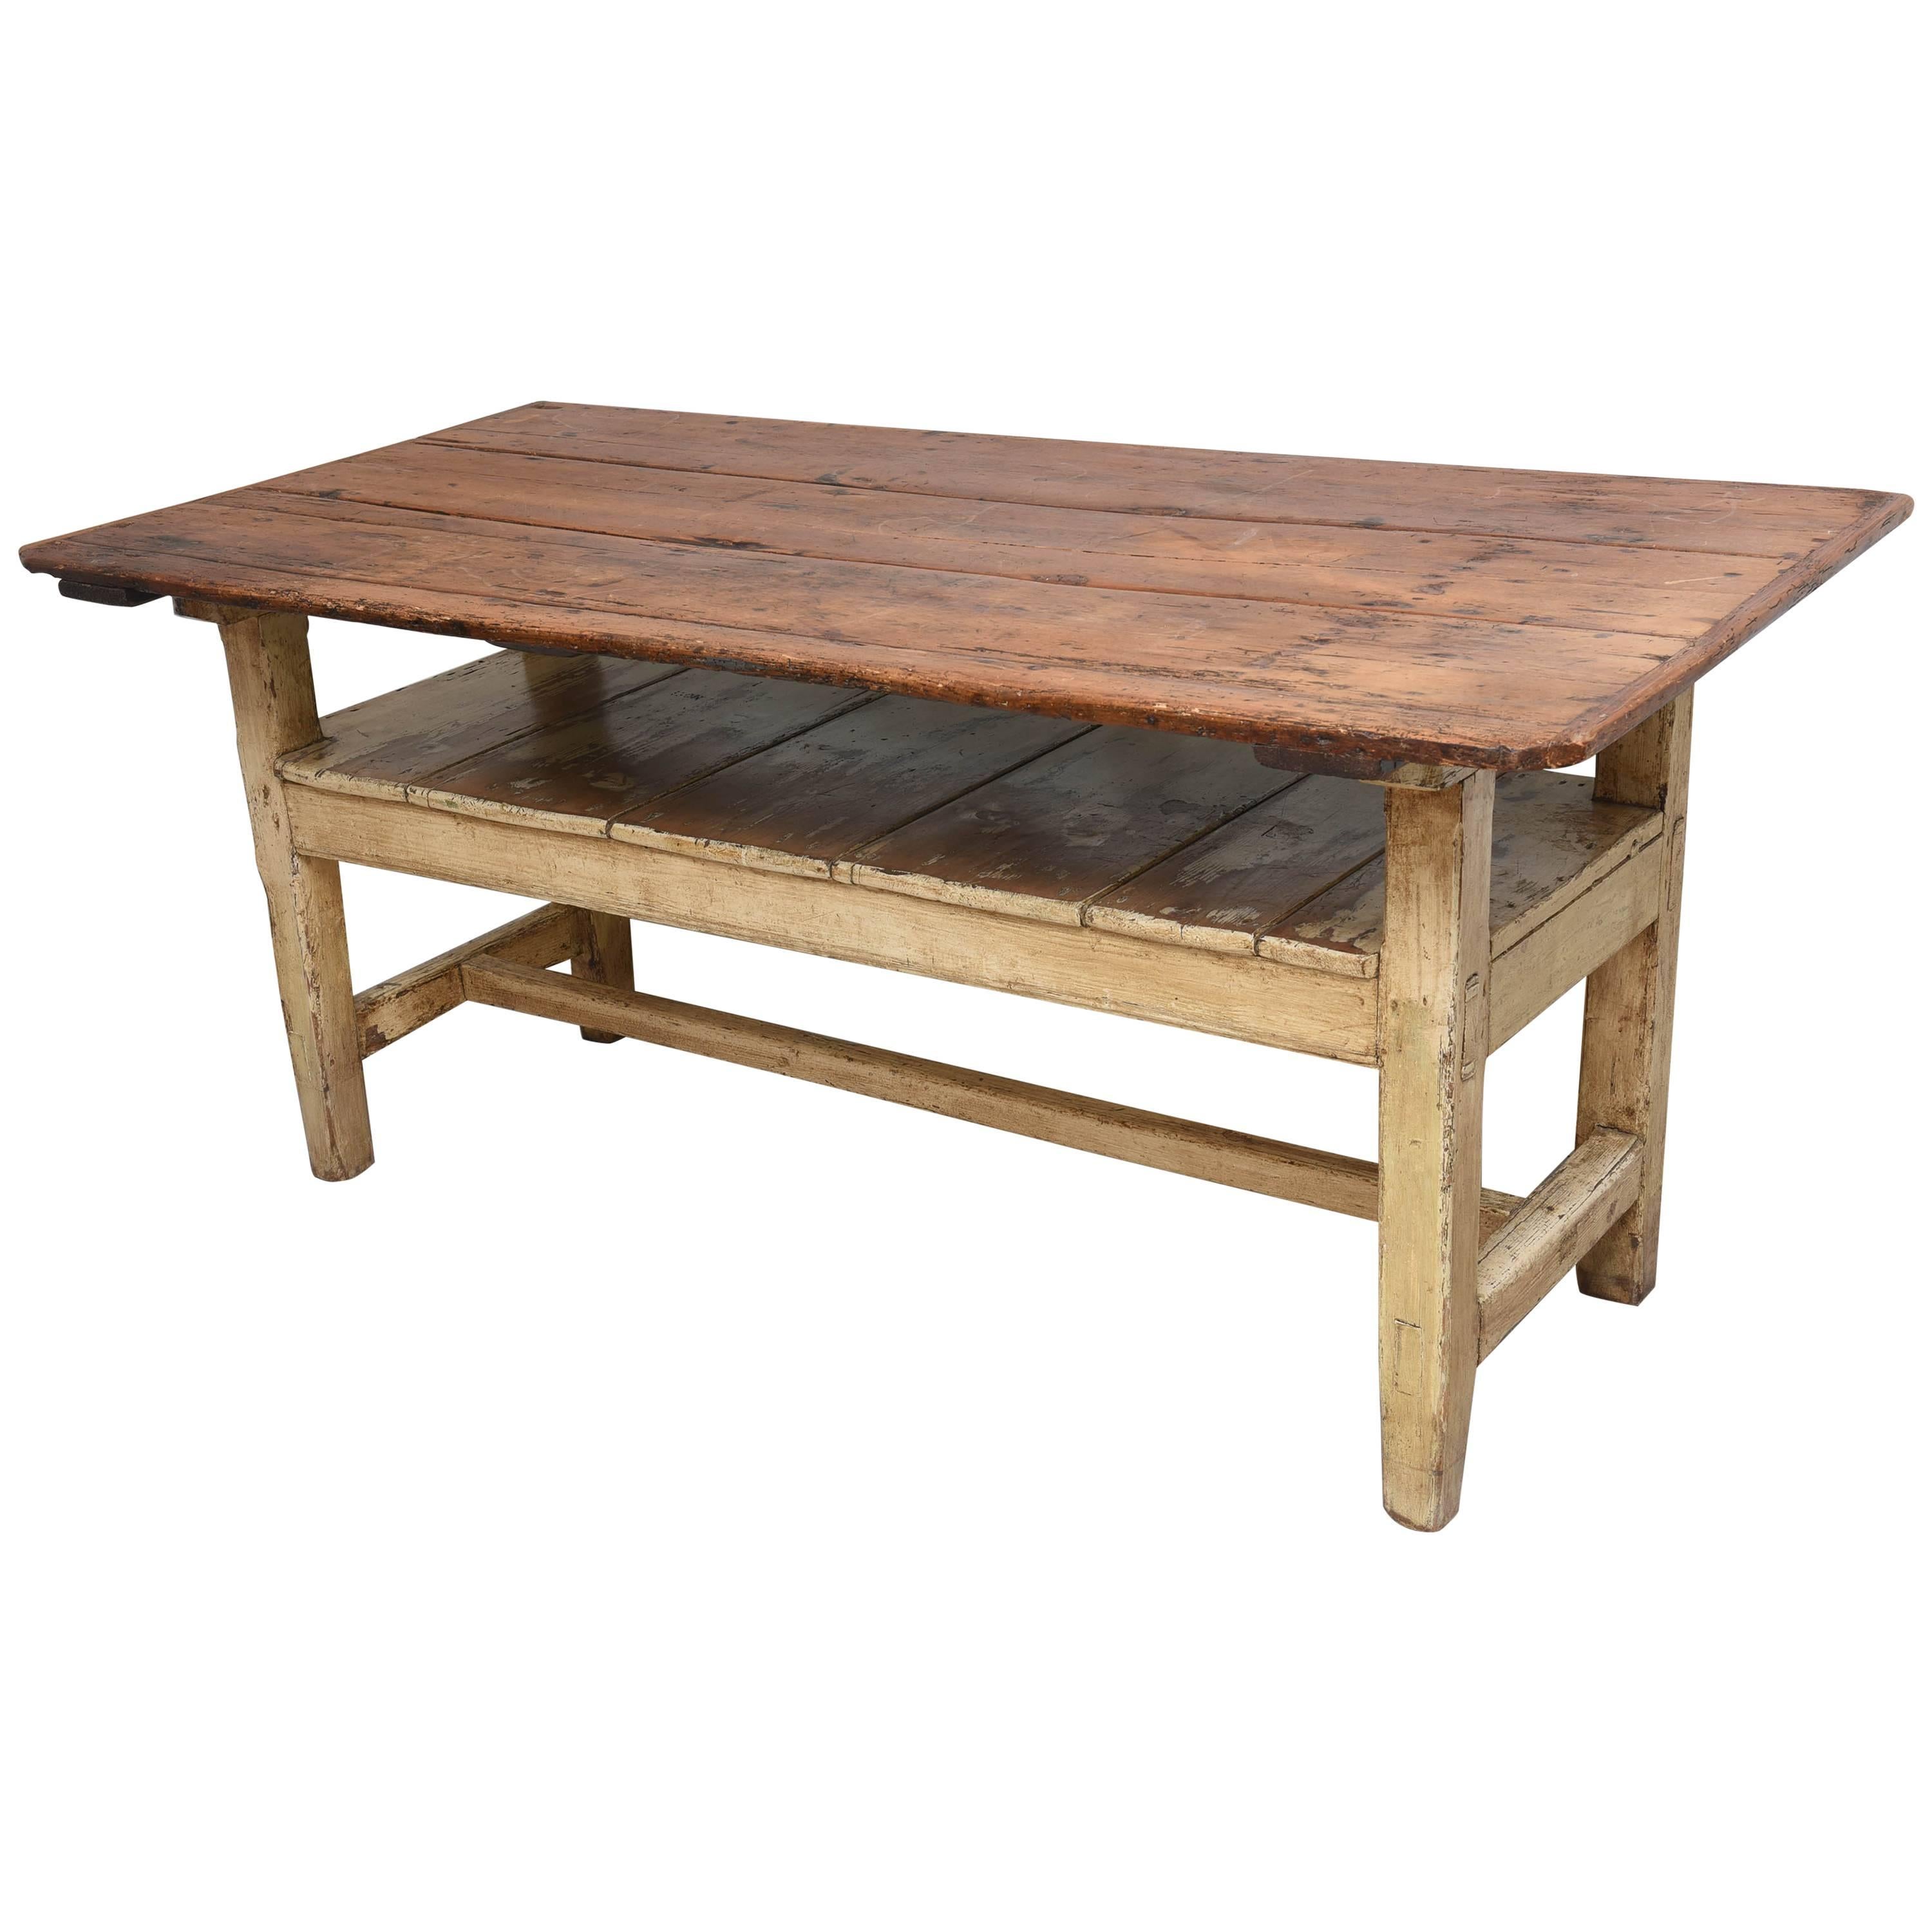 19th Century Farm Table or Settlers Bench